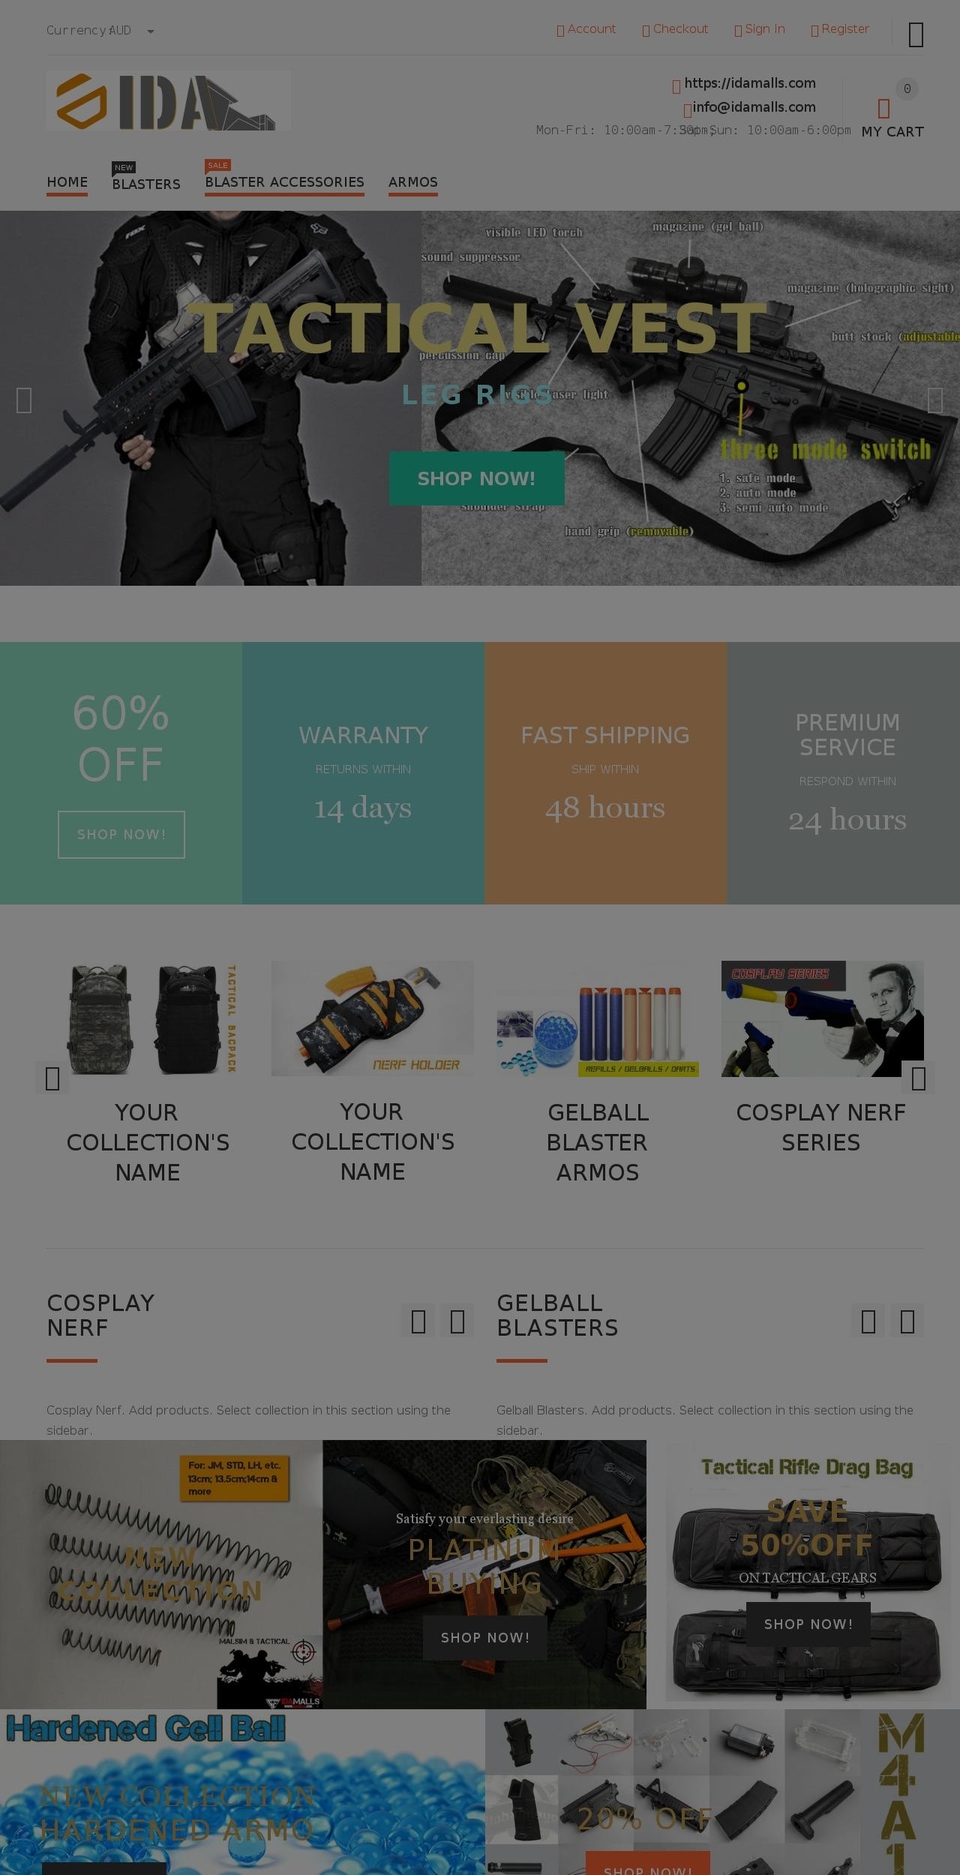 yourstore-v2-1-6 Shopify theme site example idamalls.com